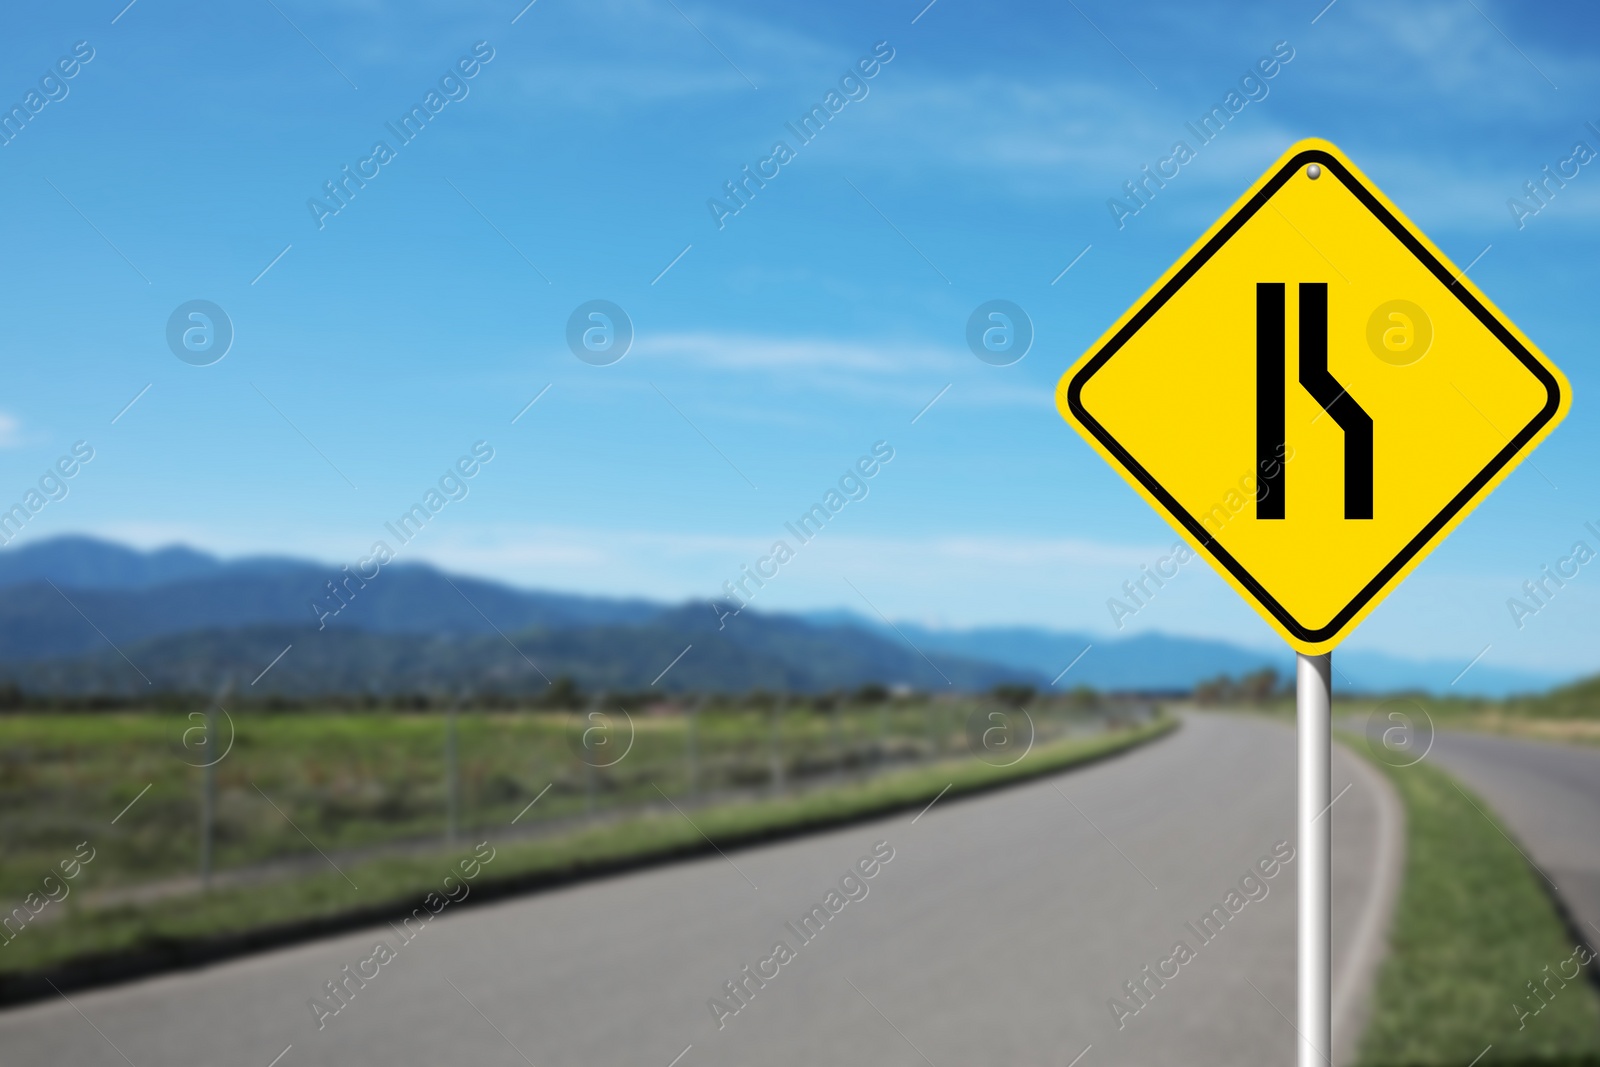 Image of Road Narrows On Right road sign on highway, space for text